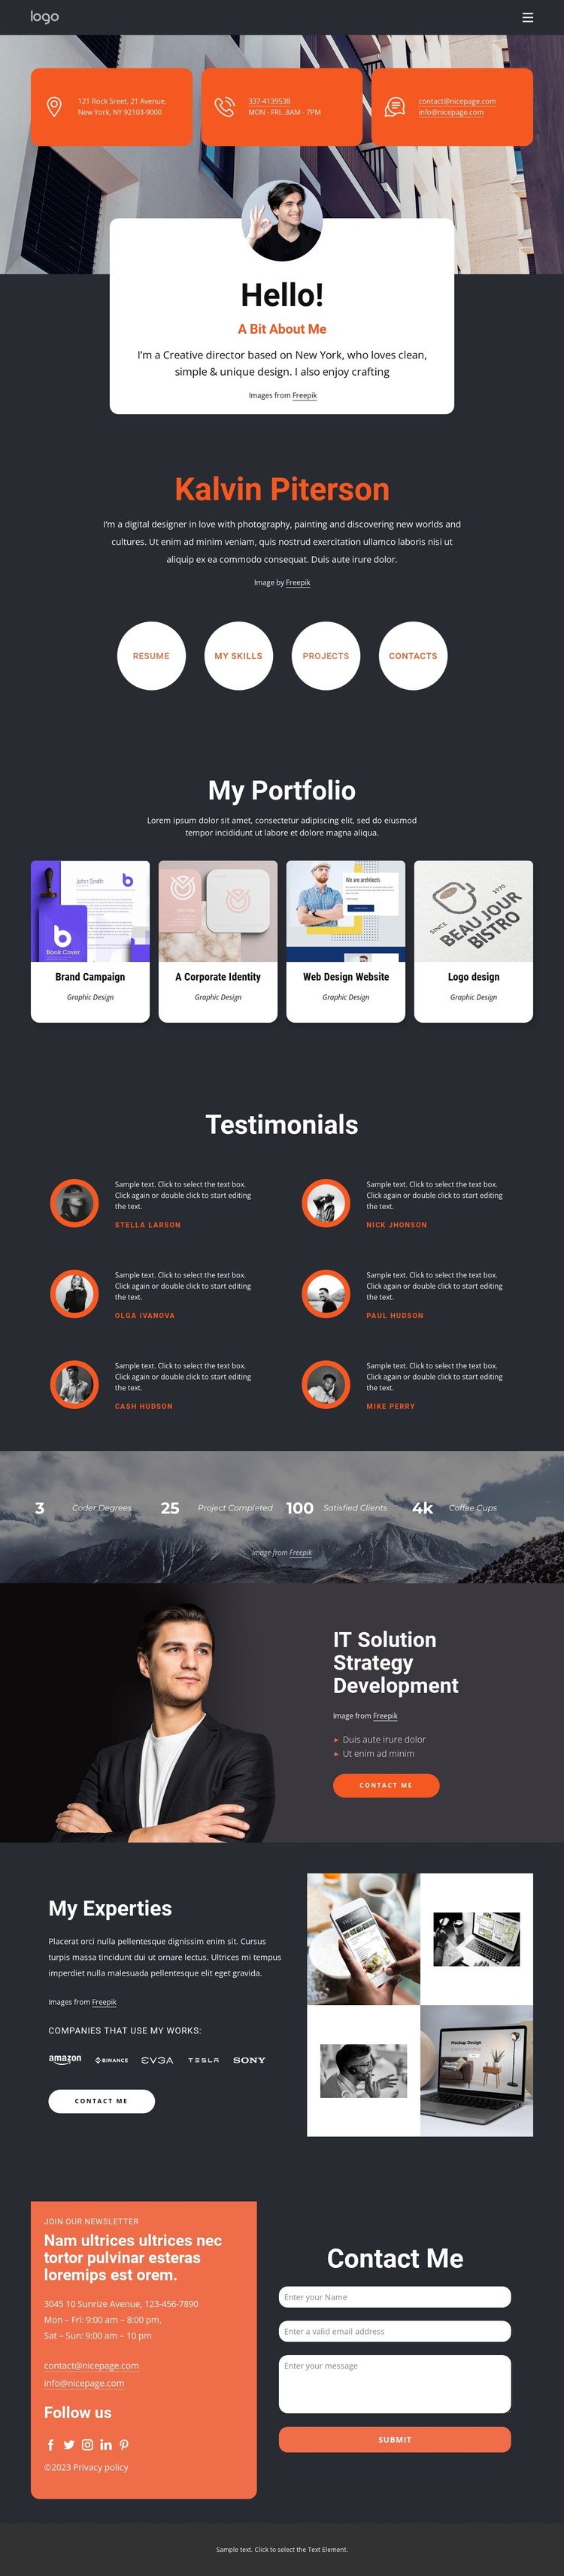 A bit about me HTML5 Template